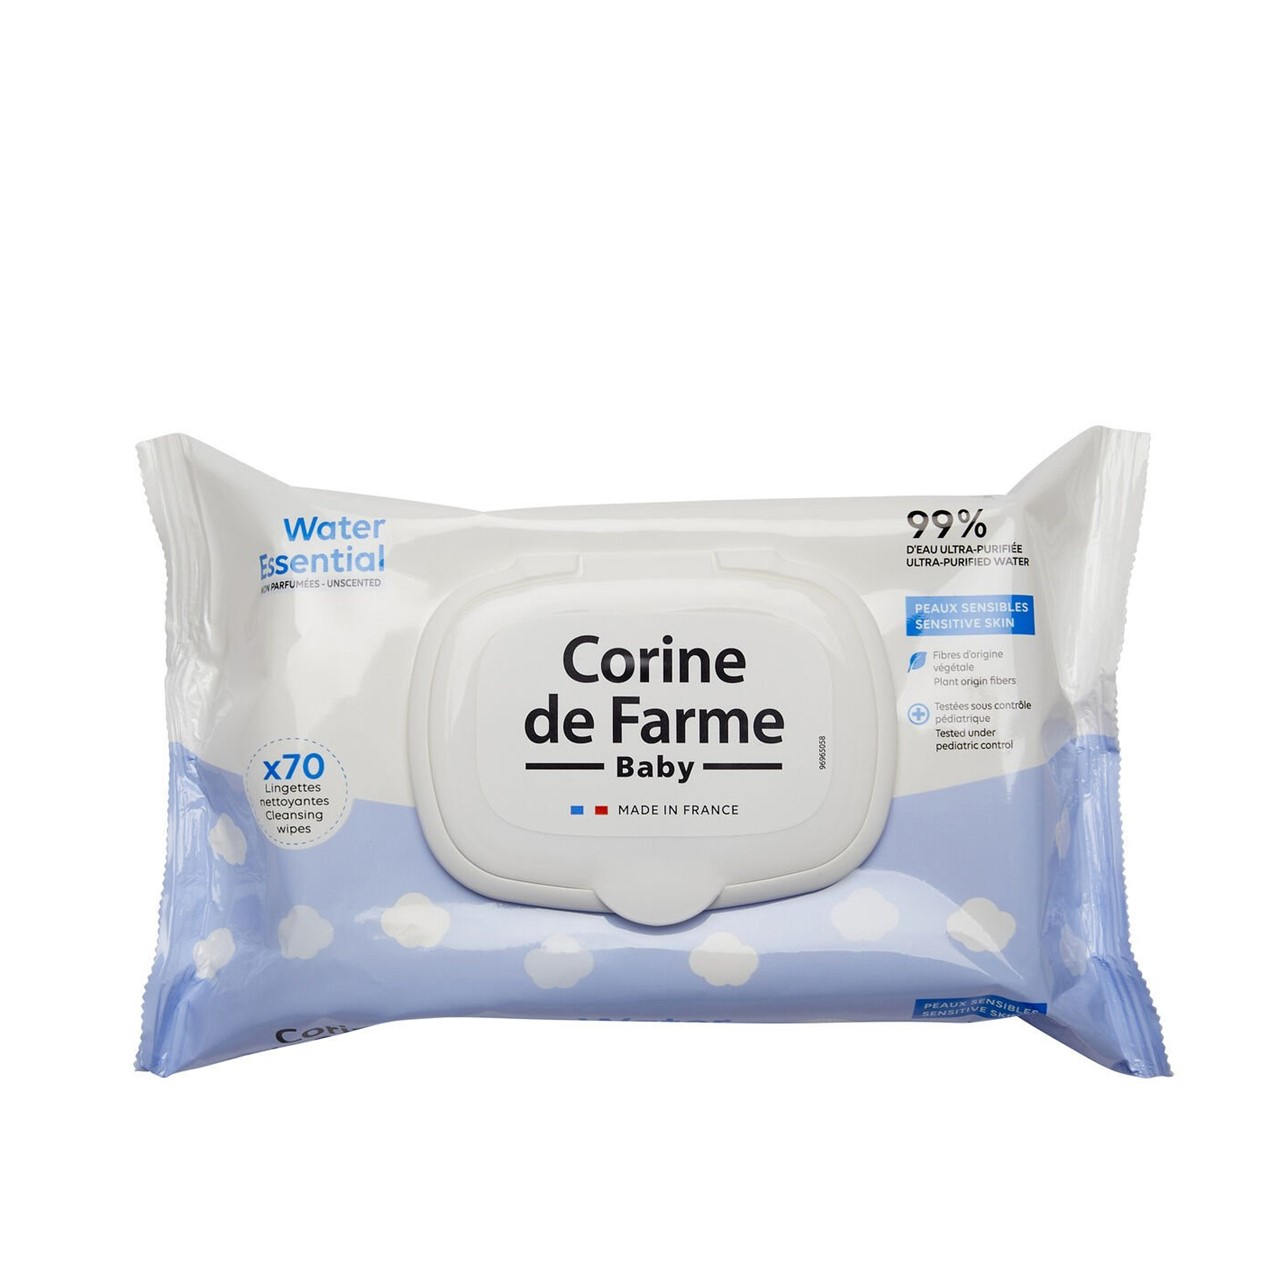 Corine de Farme Baby Water Essential Unscented Cleansing Wipes x70